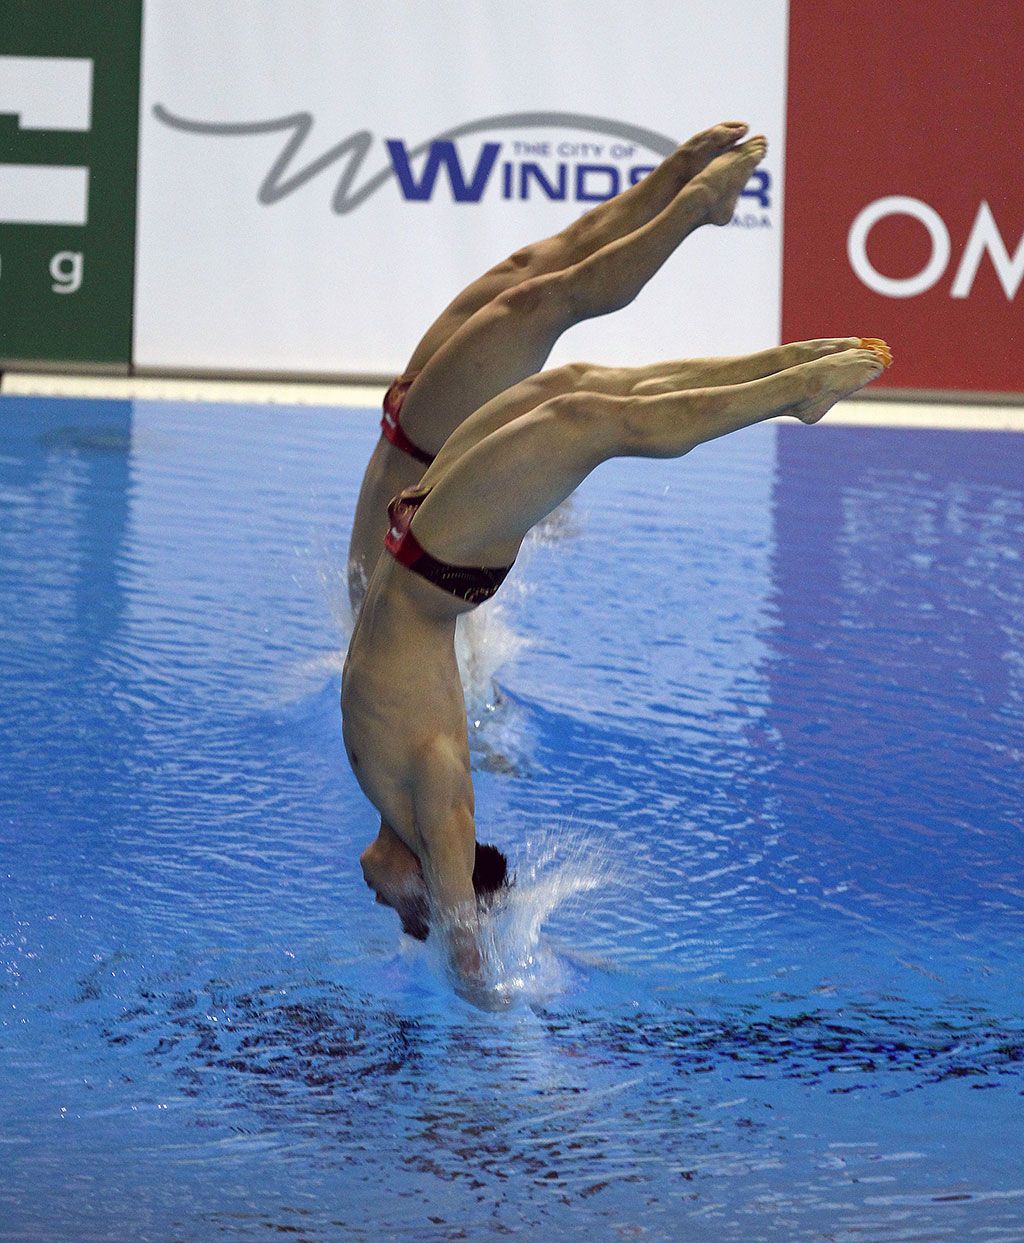 China's Chao He and Chong He compete in the men's 3m synchro springboard event at the Fina Diving World Series at the Windsor International Aquatic and Training Centre in Windsor on Friday, May 22, 2015. (TYLER BROWNBRIDGE/The Windsor Star)